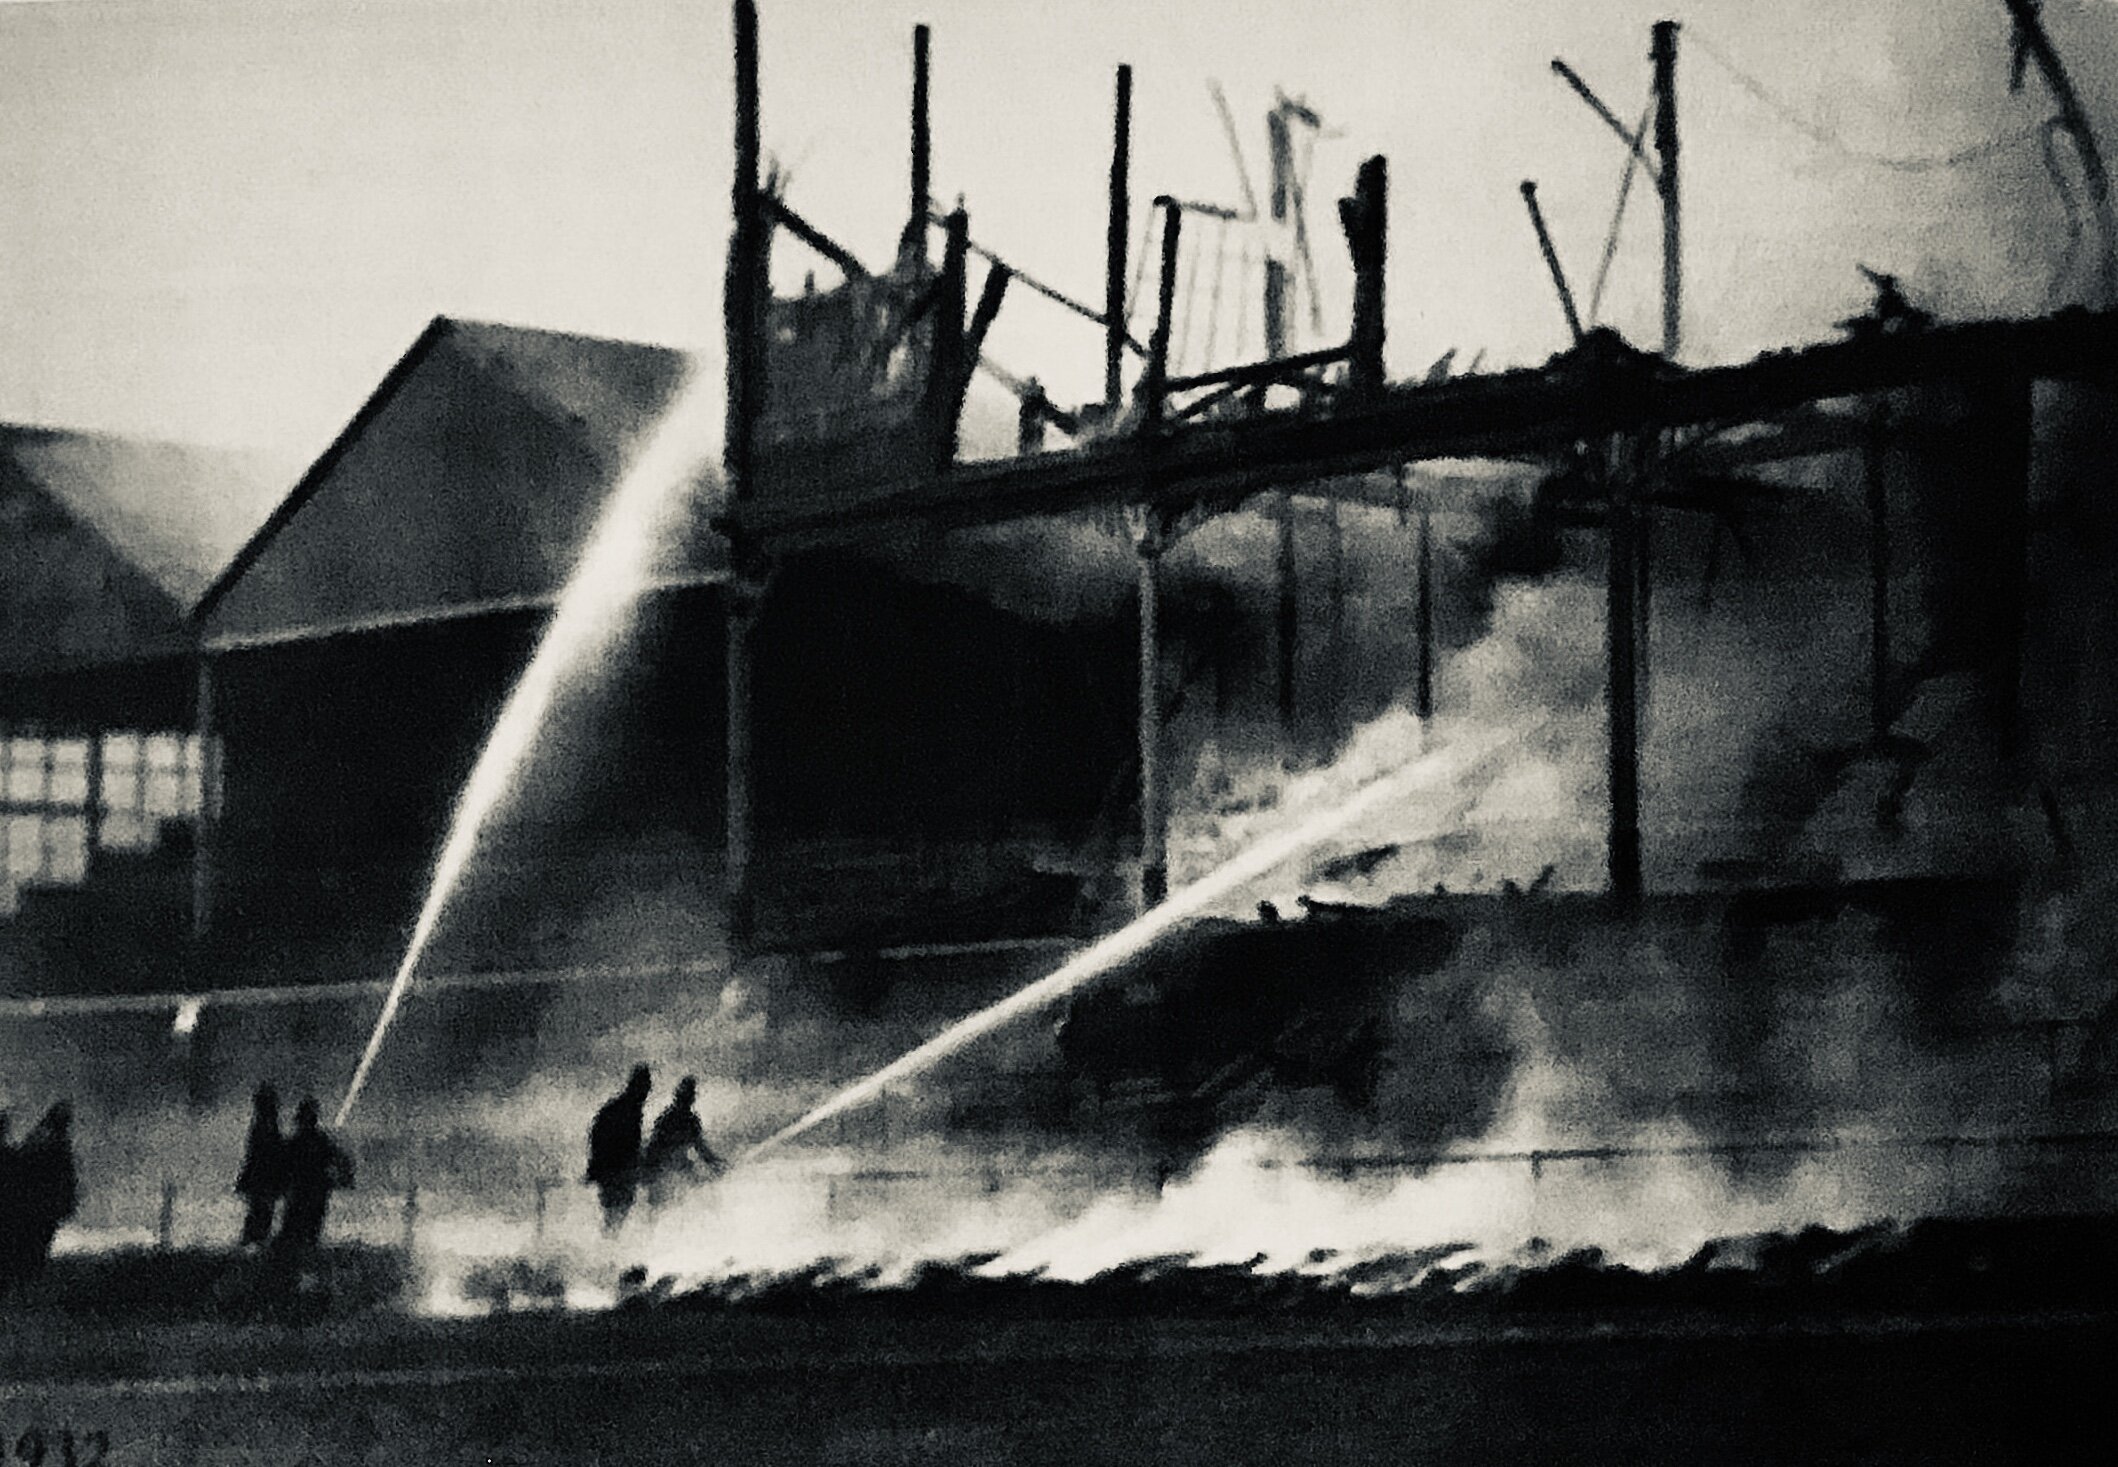 Fire destroys North Stand, Rugby Ground, 1932 